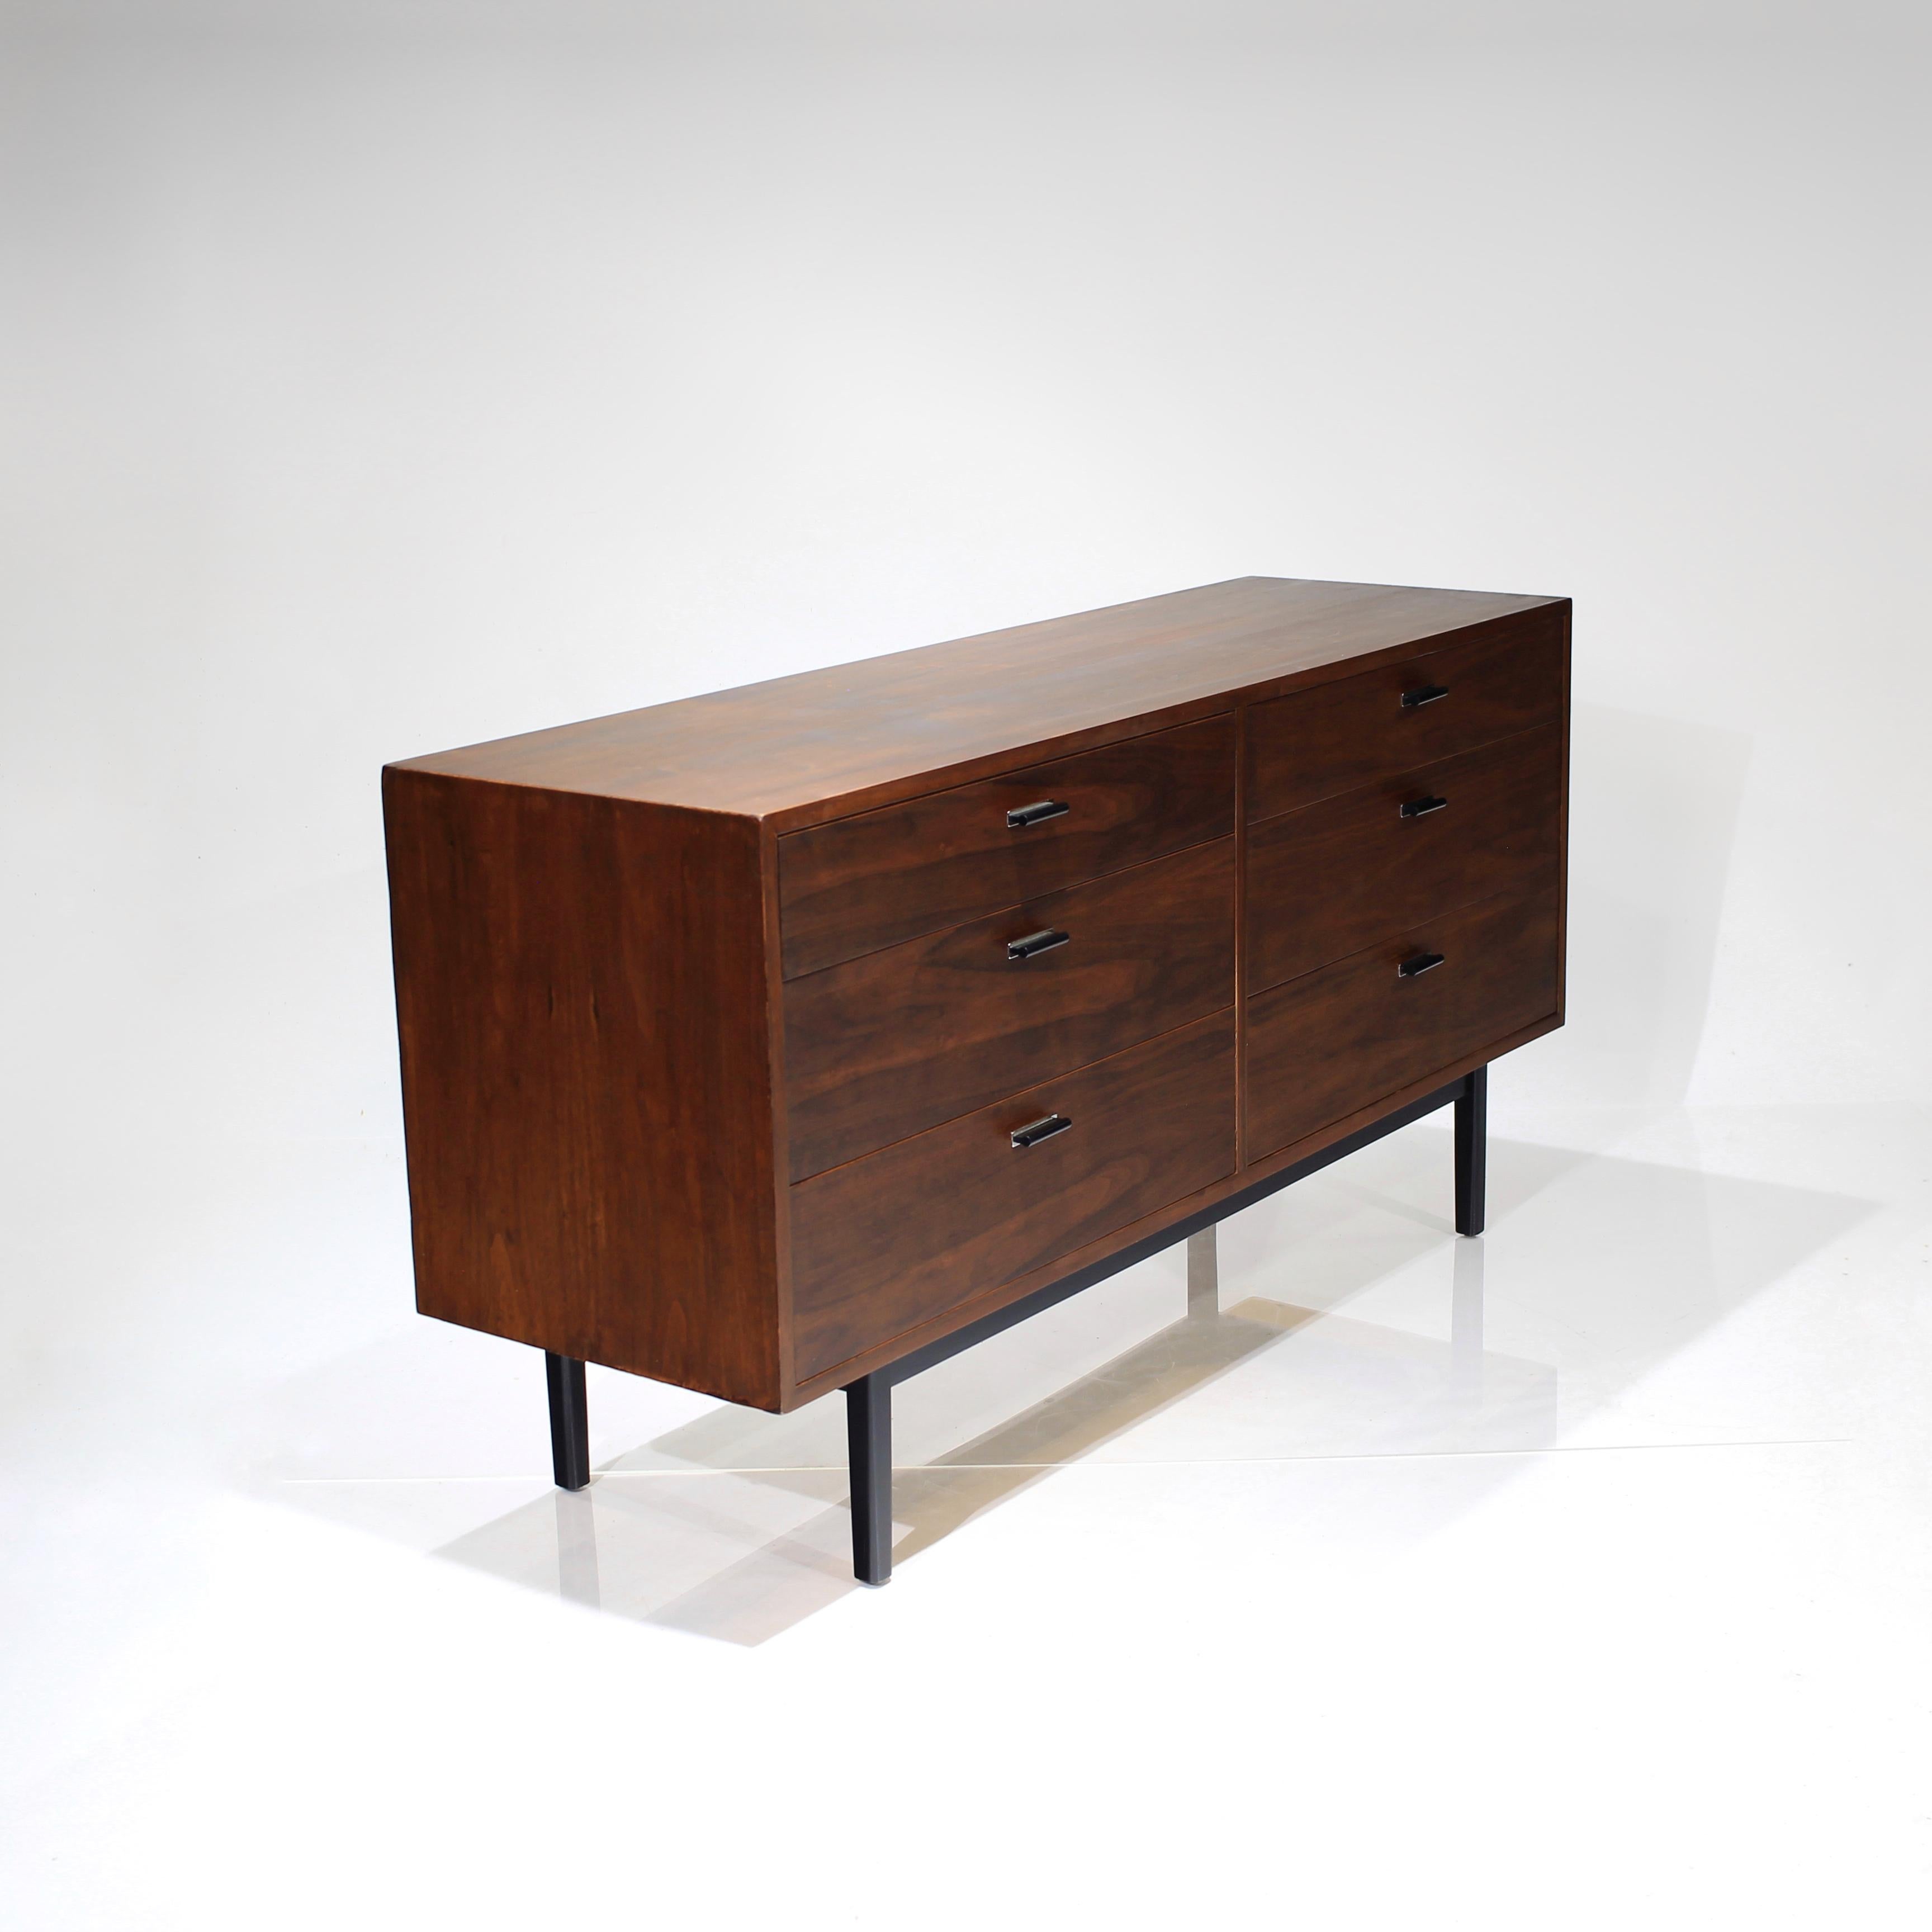 American Mid-Century Modern Walnut Dresser with 6 Drawers by Jack Cartwright For Sale